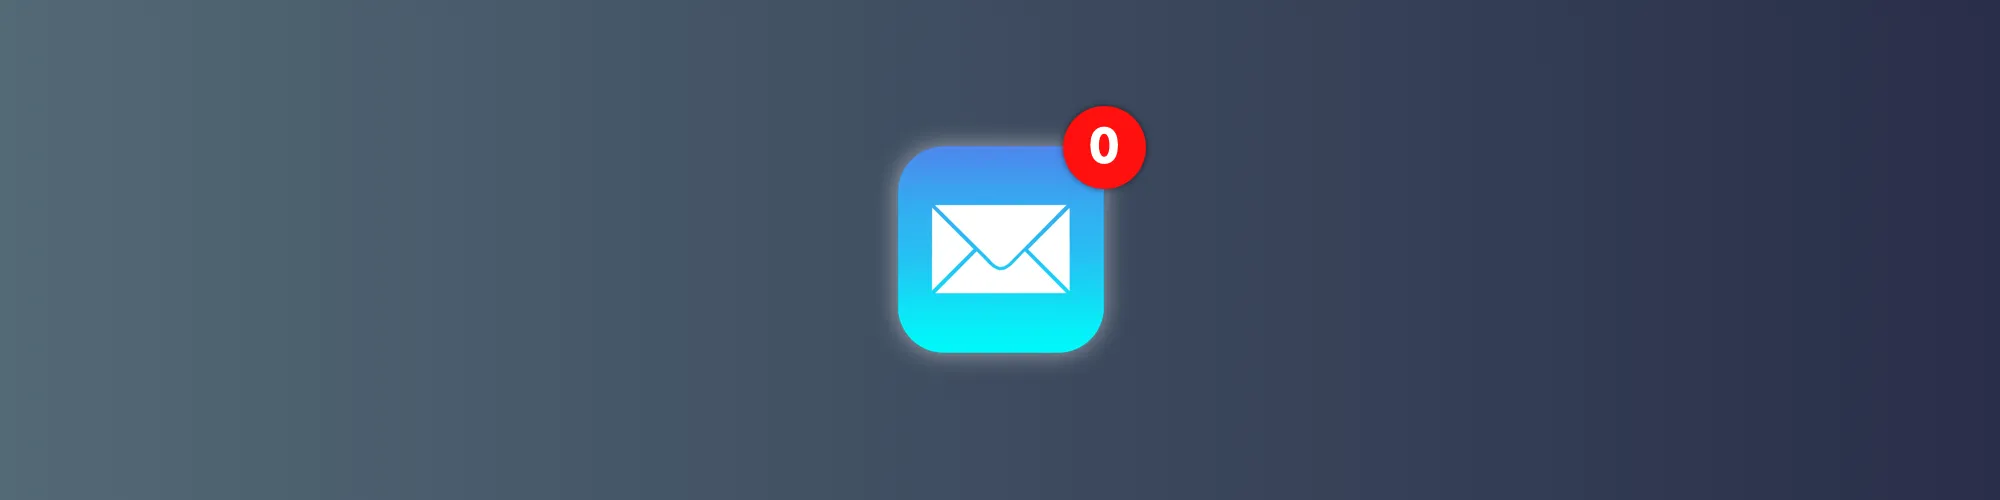 A image showing the iOS Mail app icon with a zero notifications badge count.